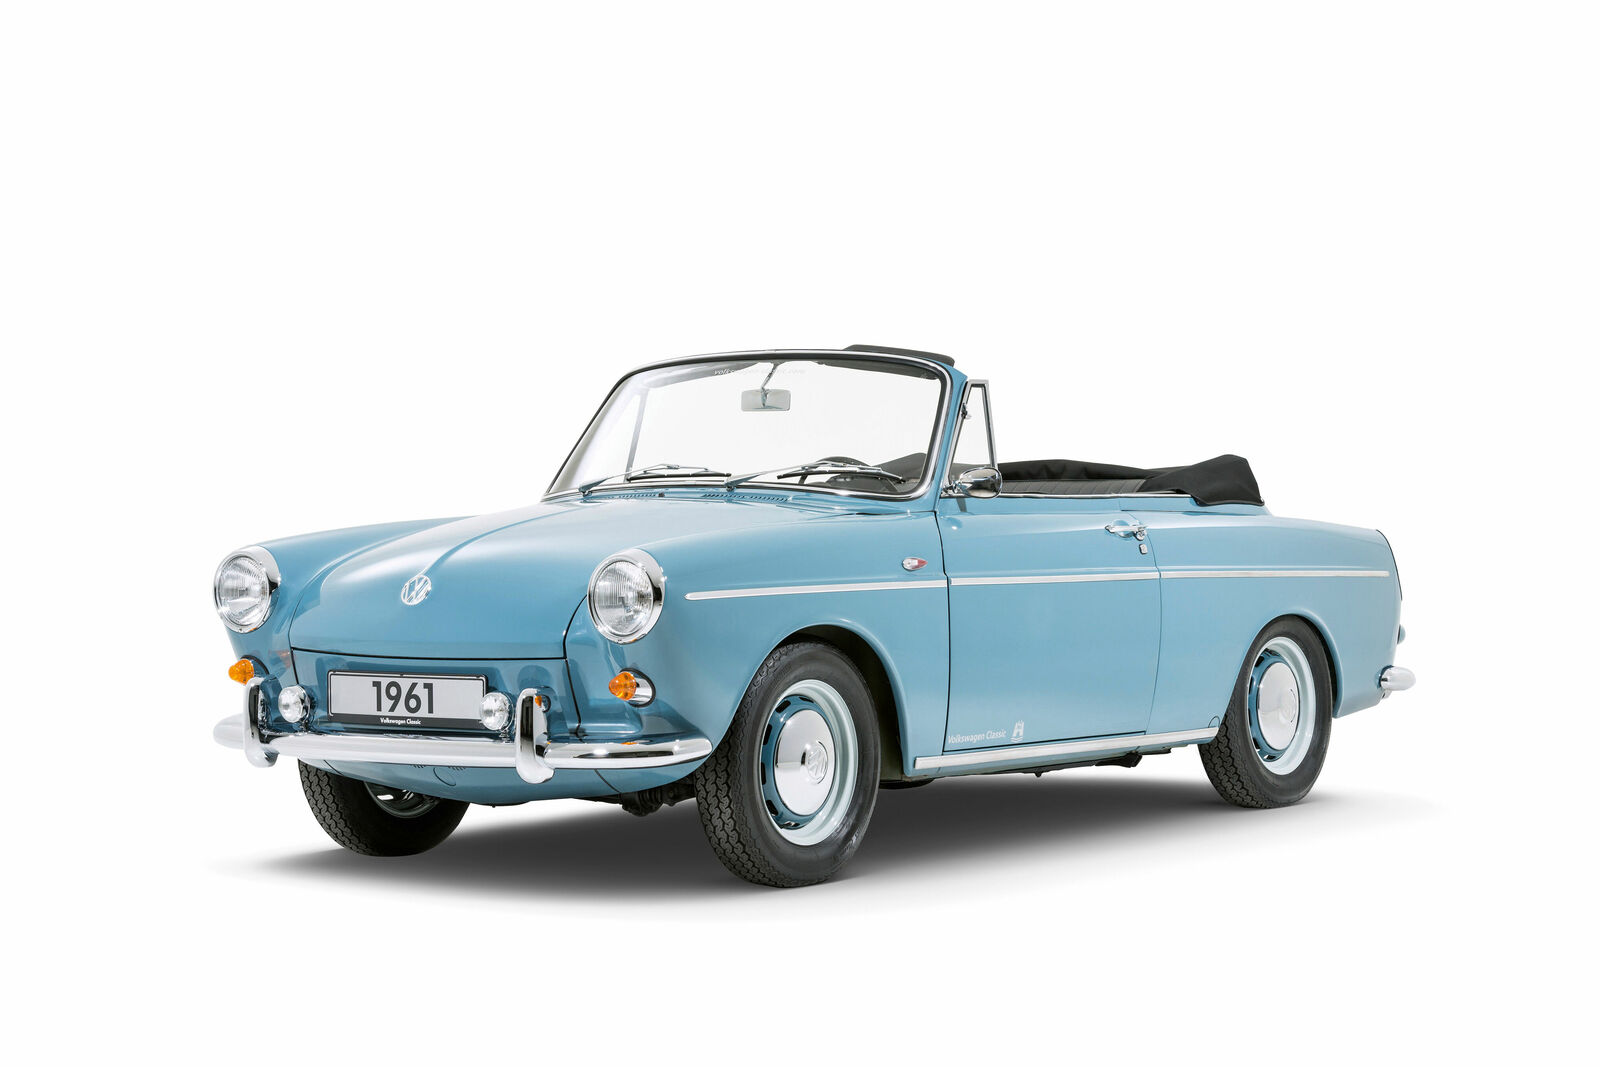 The Volkswagen Type 3 convertible from 1961, in newly restored condition.